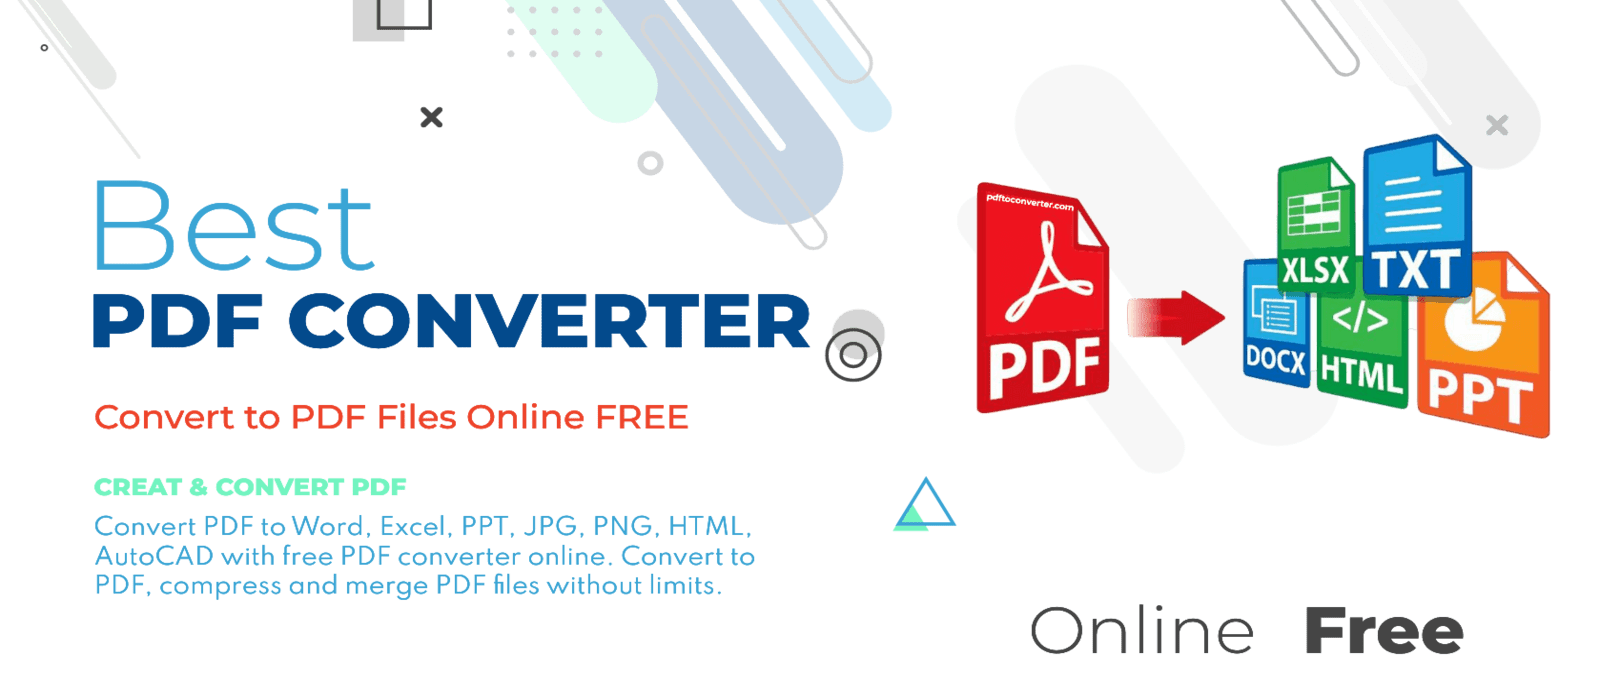 Get to know PDFtoConverter - the only tool you require for complete PDF handling. Transform PDFs without spending a dime - forever!